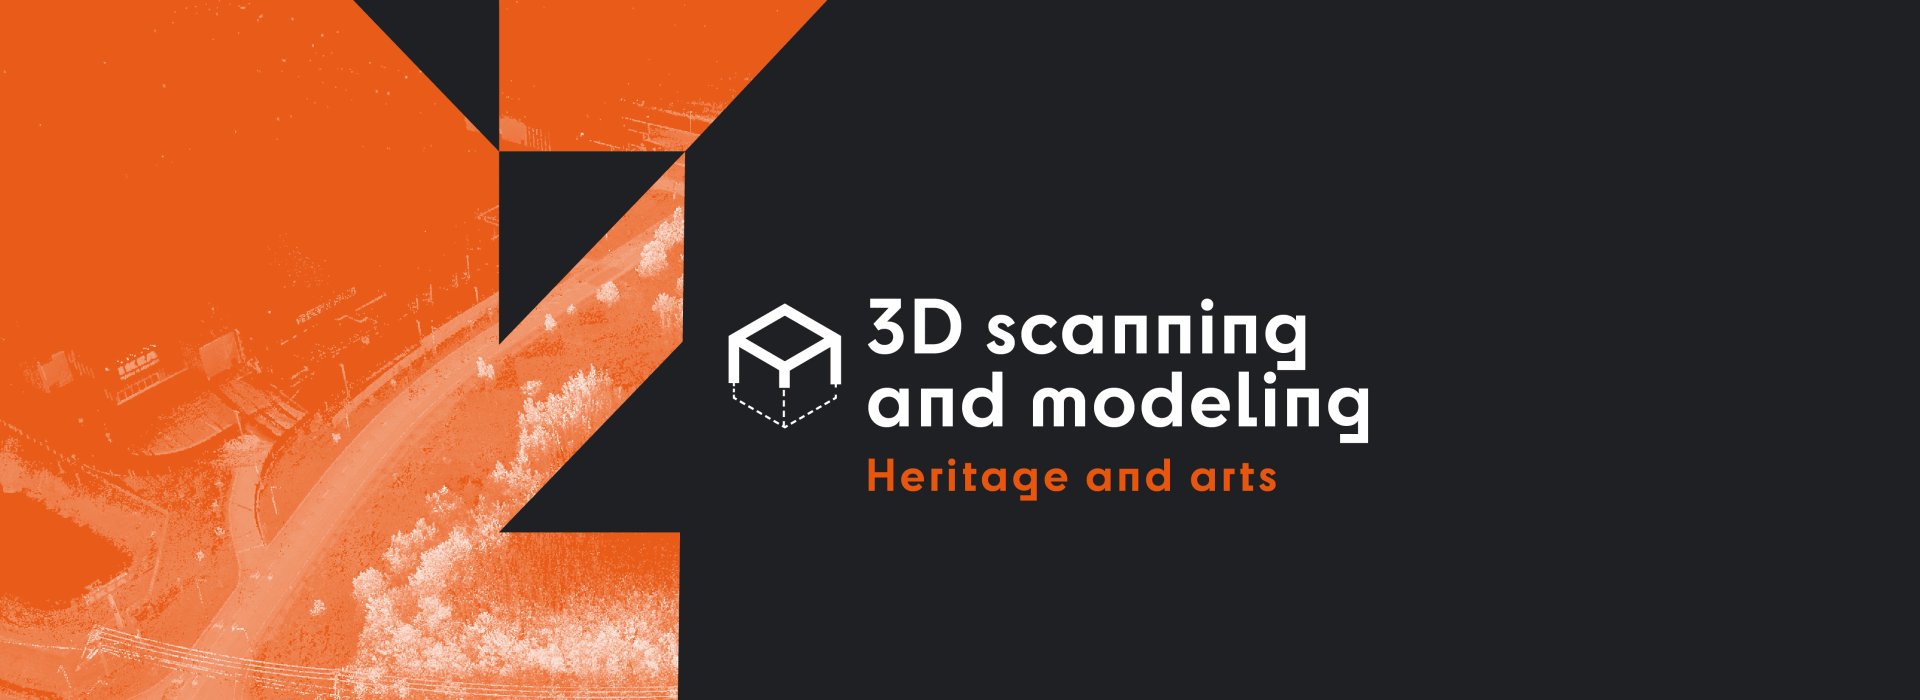 ANGLAIS_WebBanner_3D scanning - Heritage and arts